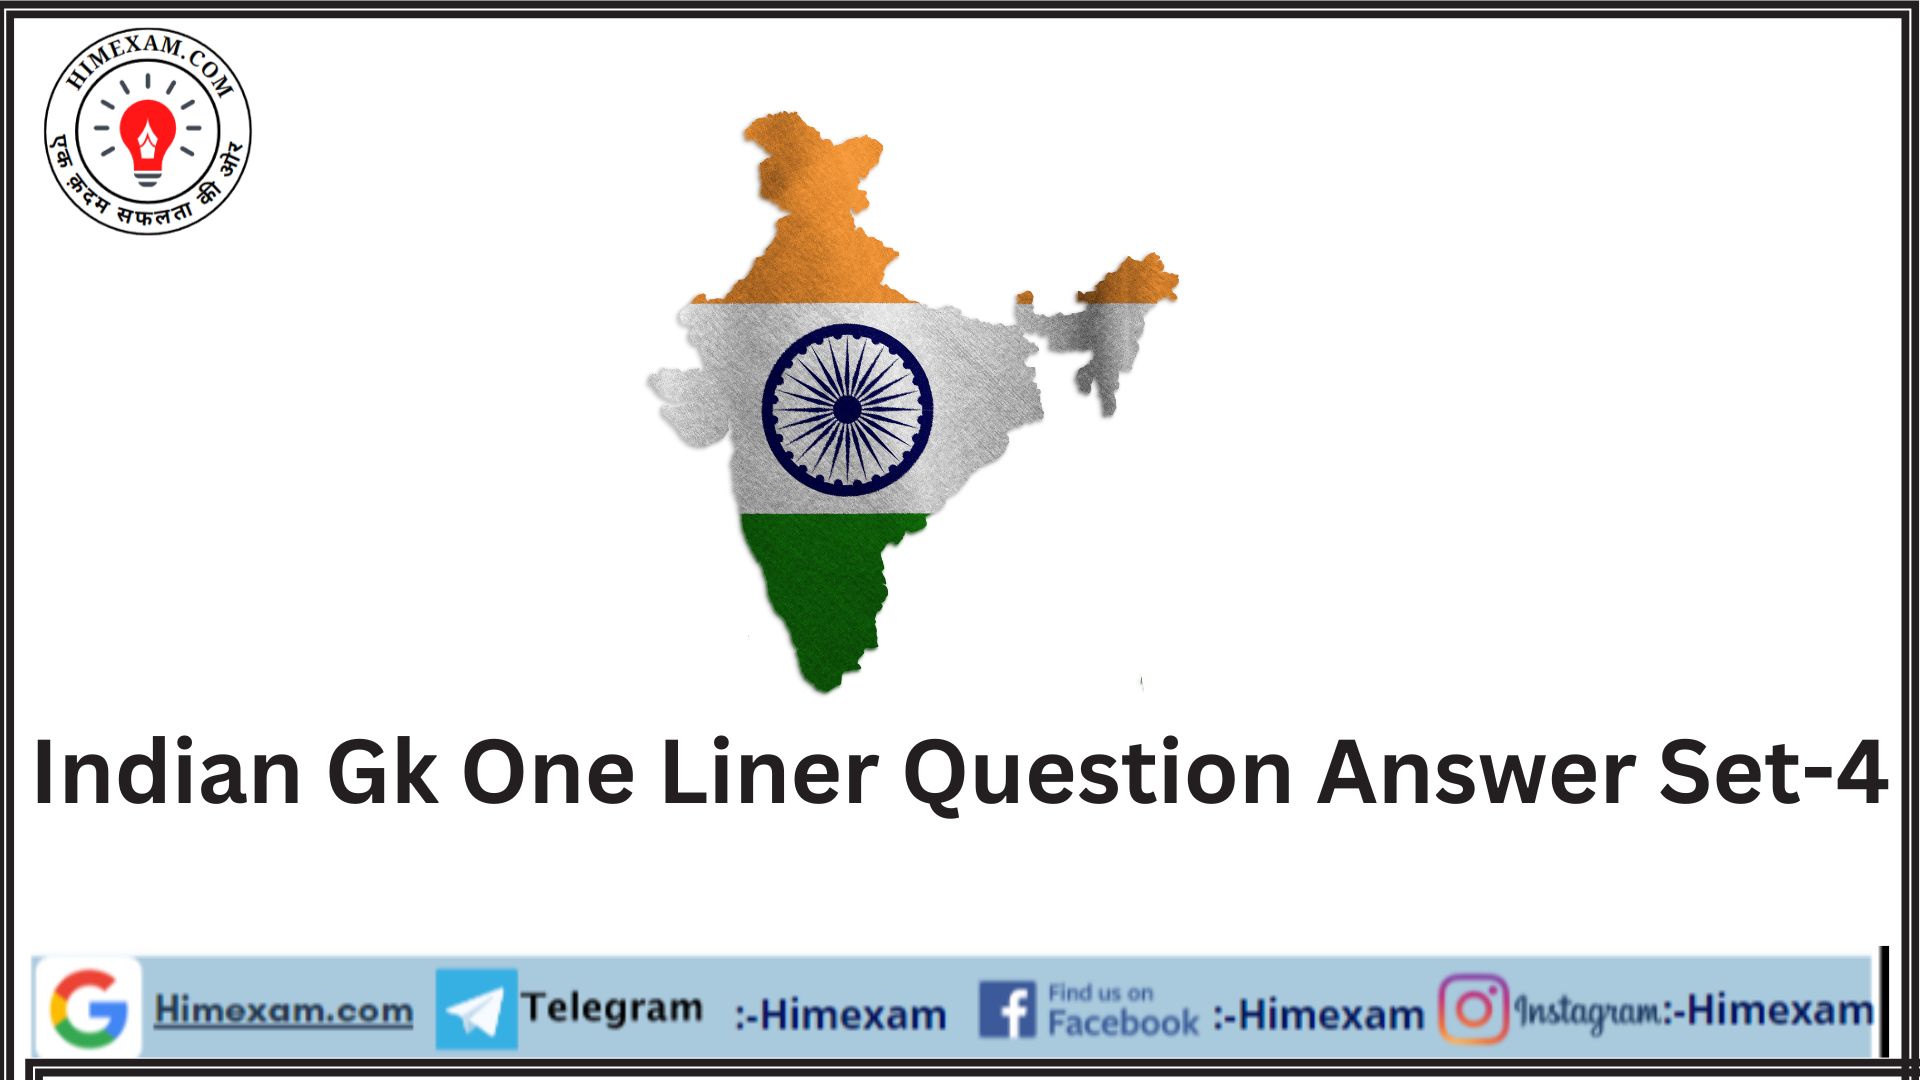 Indian Gk One Liner Question Answer Set-4